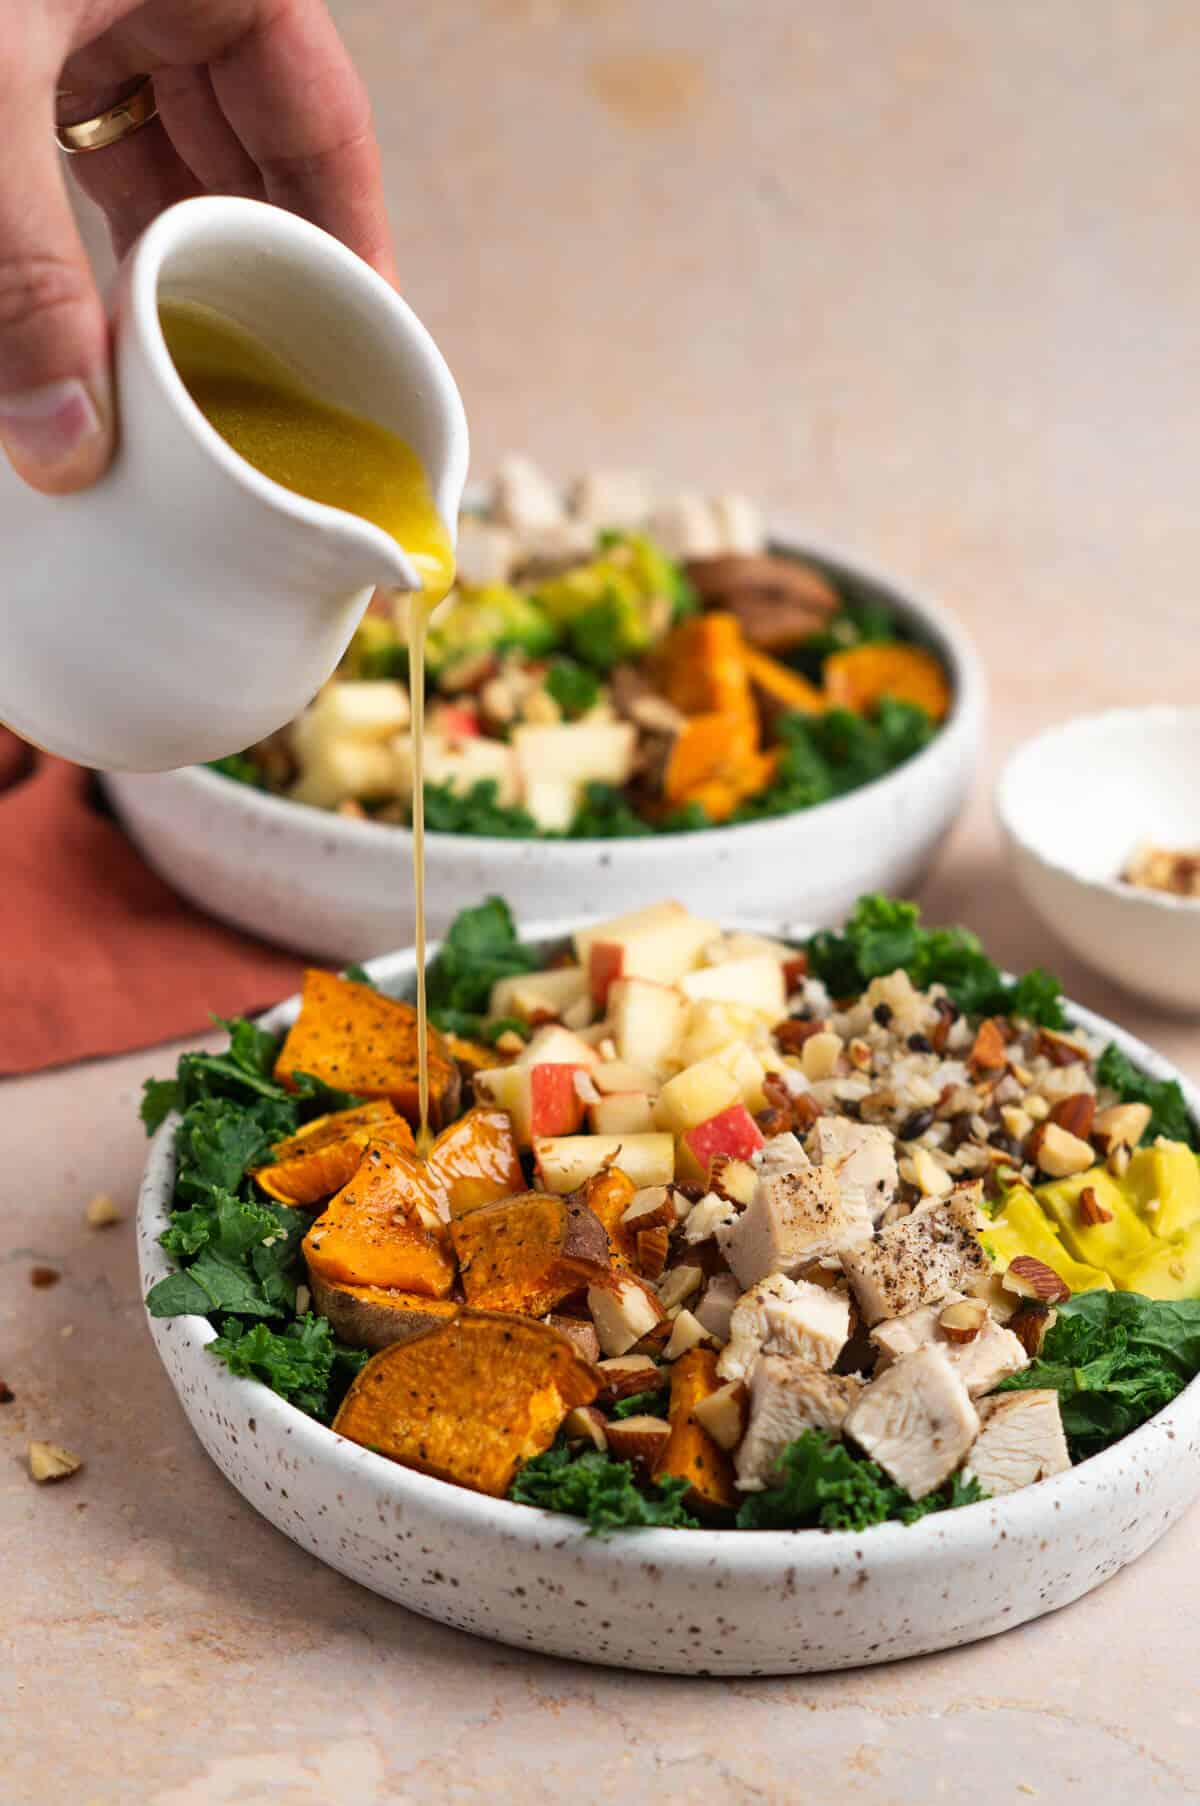 An assembled harvest bowl and balsamic dressing being drizzled over the top of the salad.